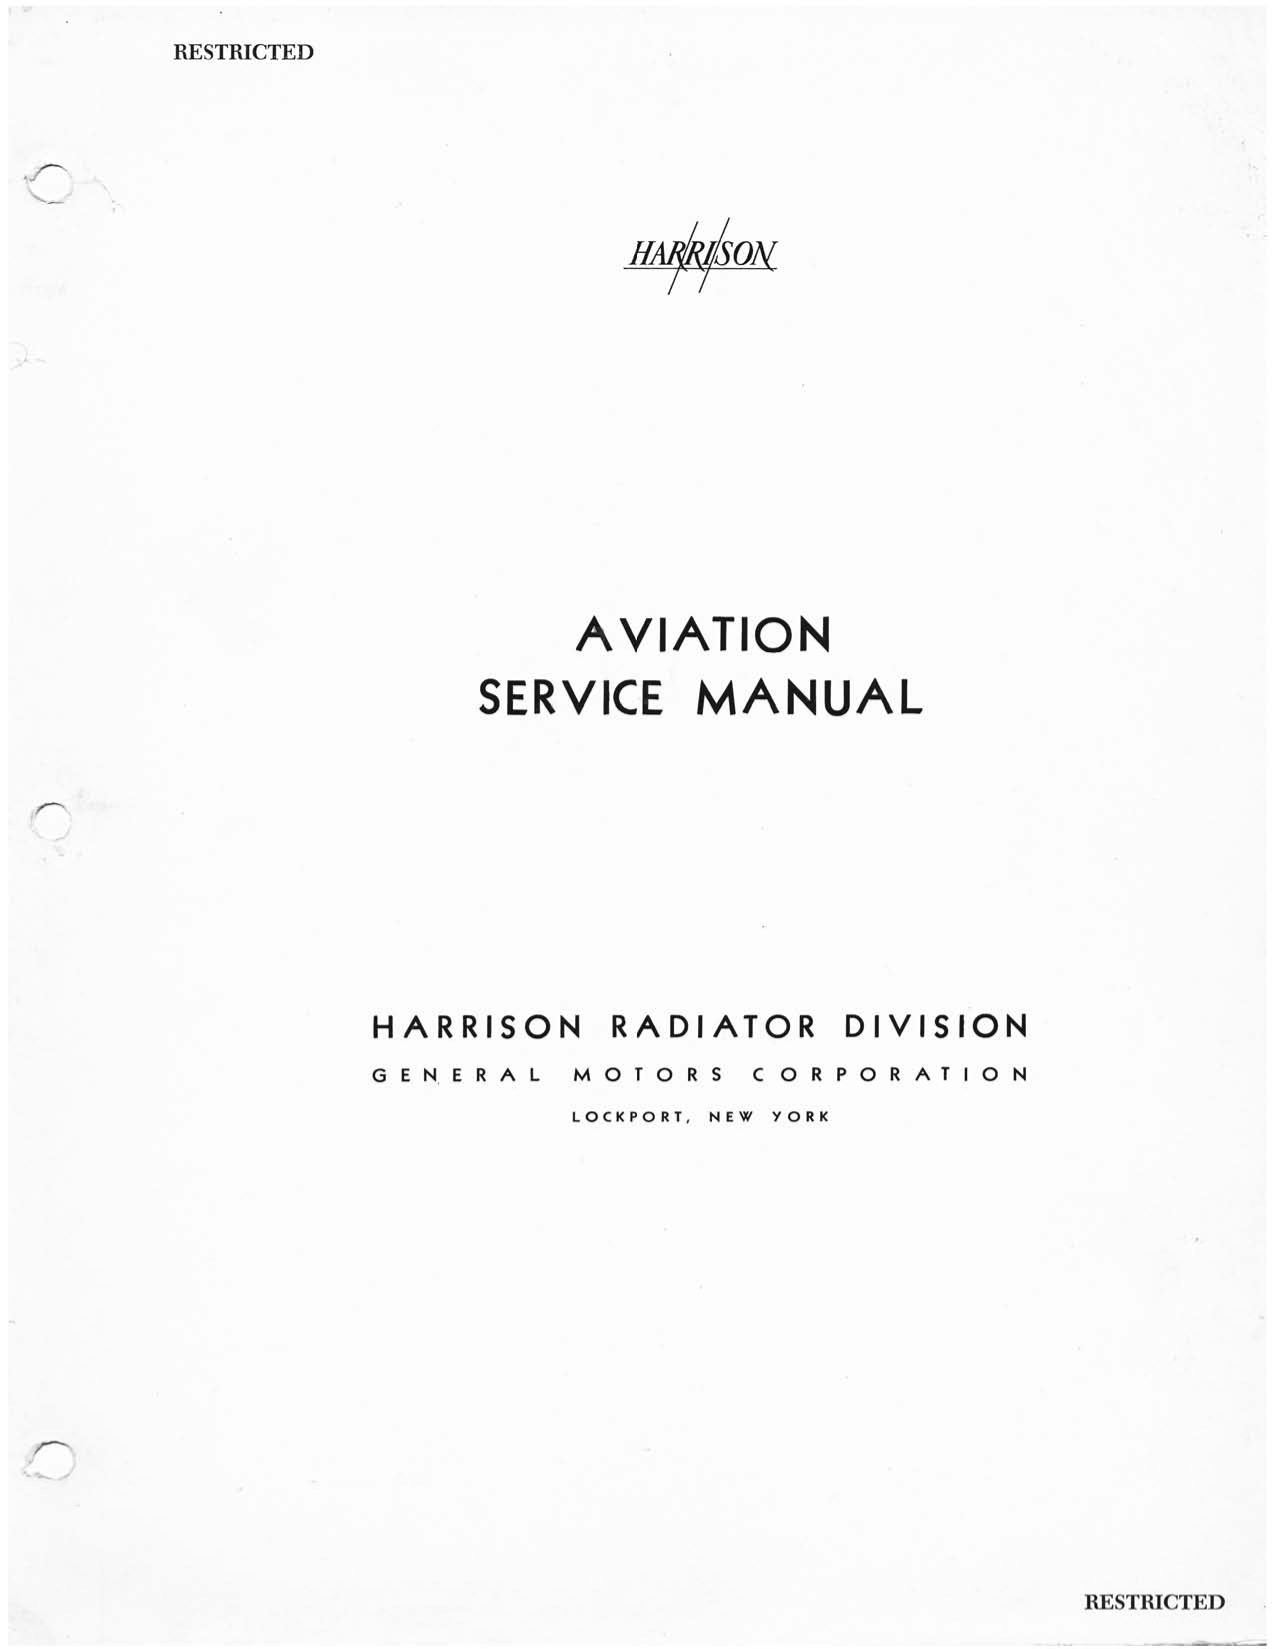 Sample page 1 from AirCorps Library document: Service Manual for Harrison Oil Coolers and Valves